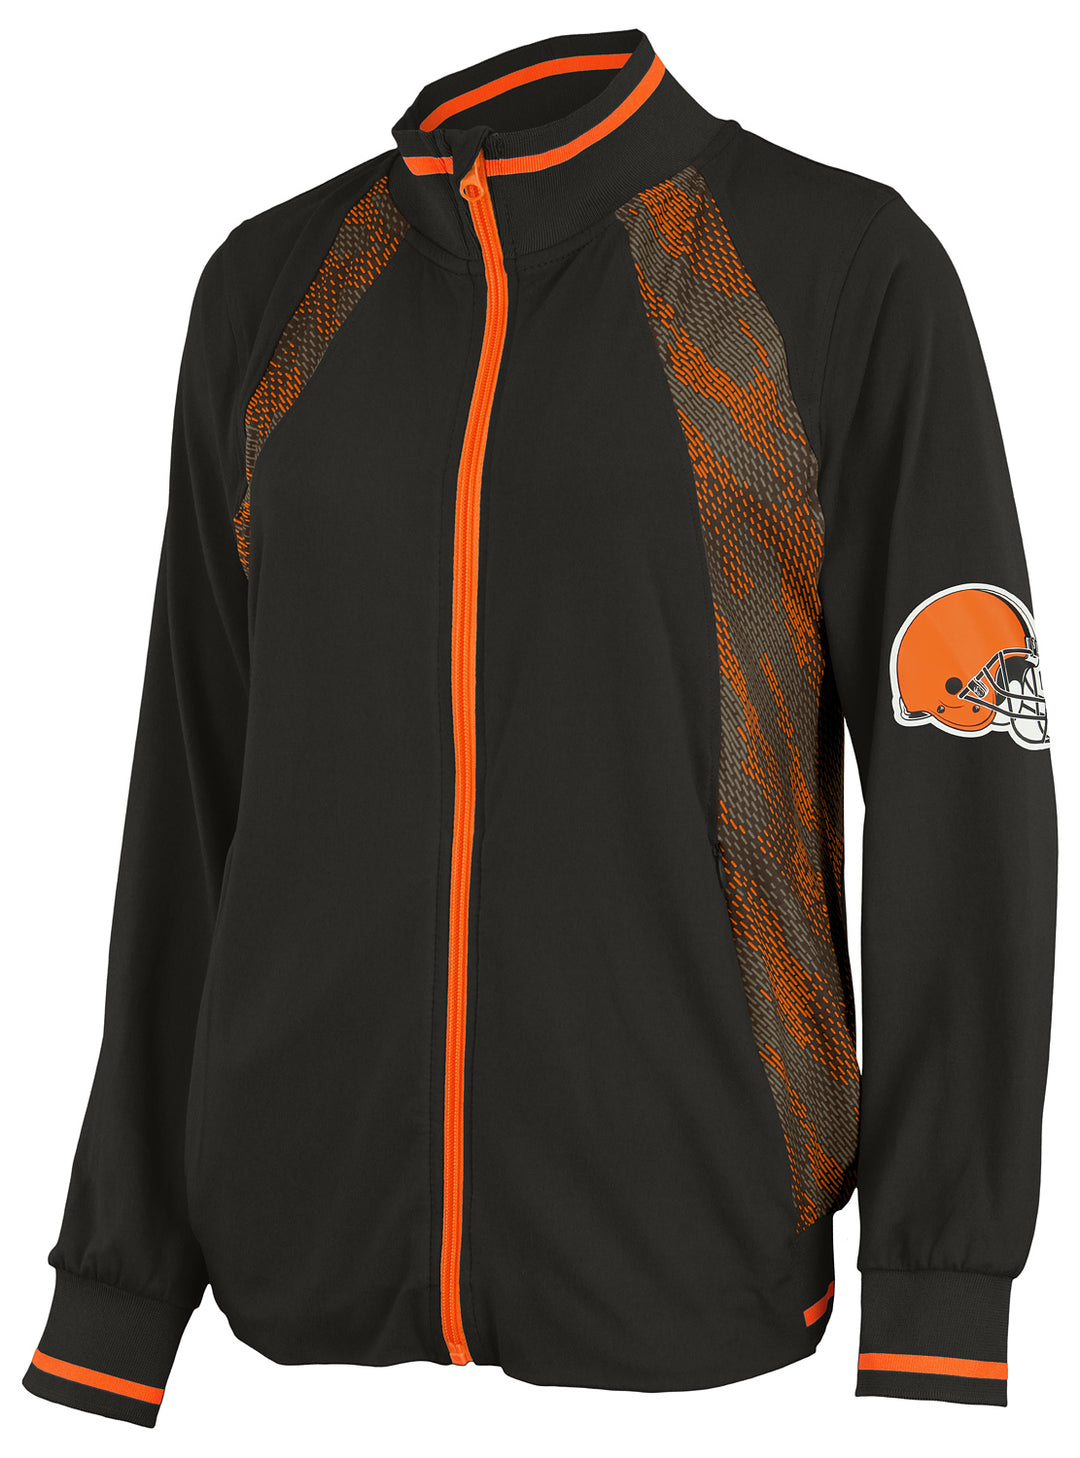 Zubaz NFL Women's Cleveland Browns Elevated Full Zip Viper Accent Jacket